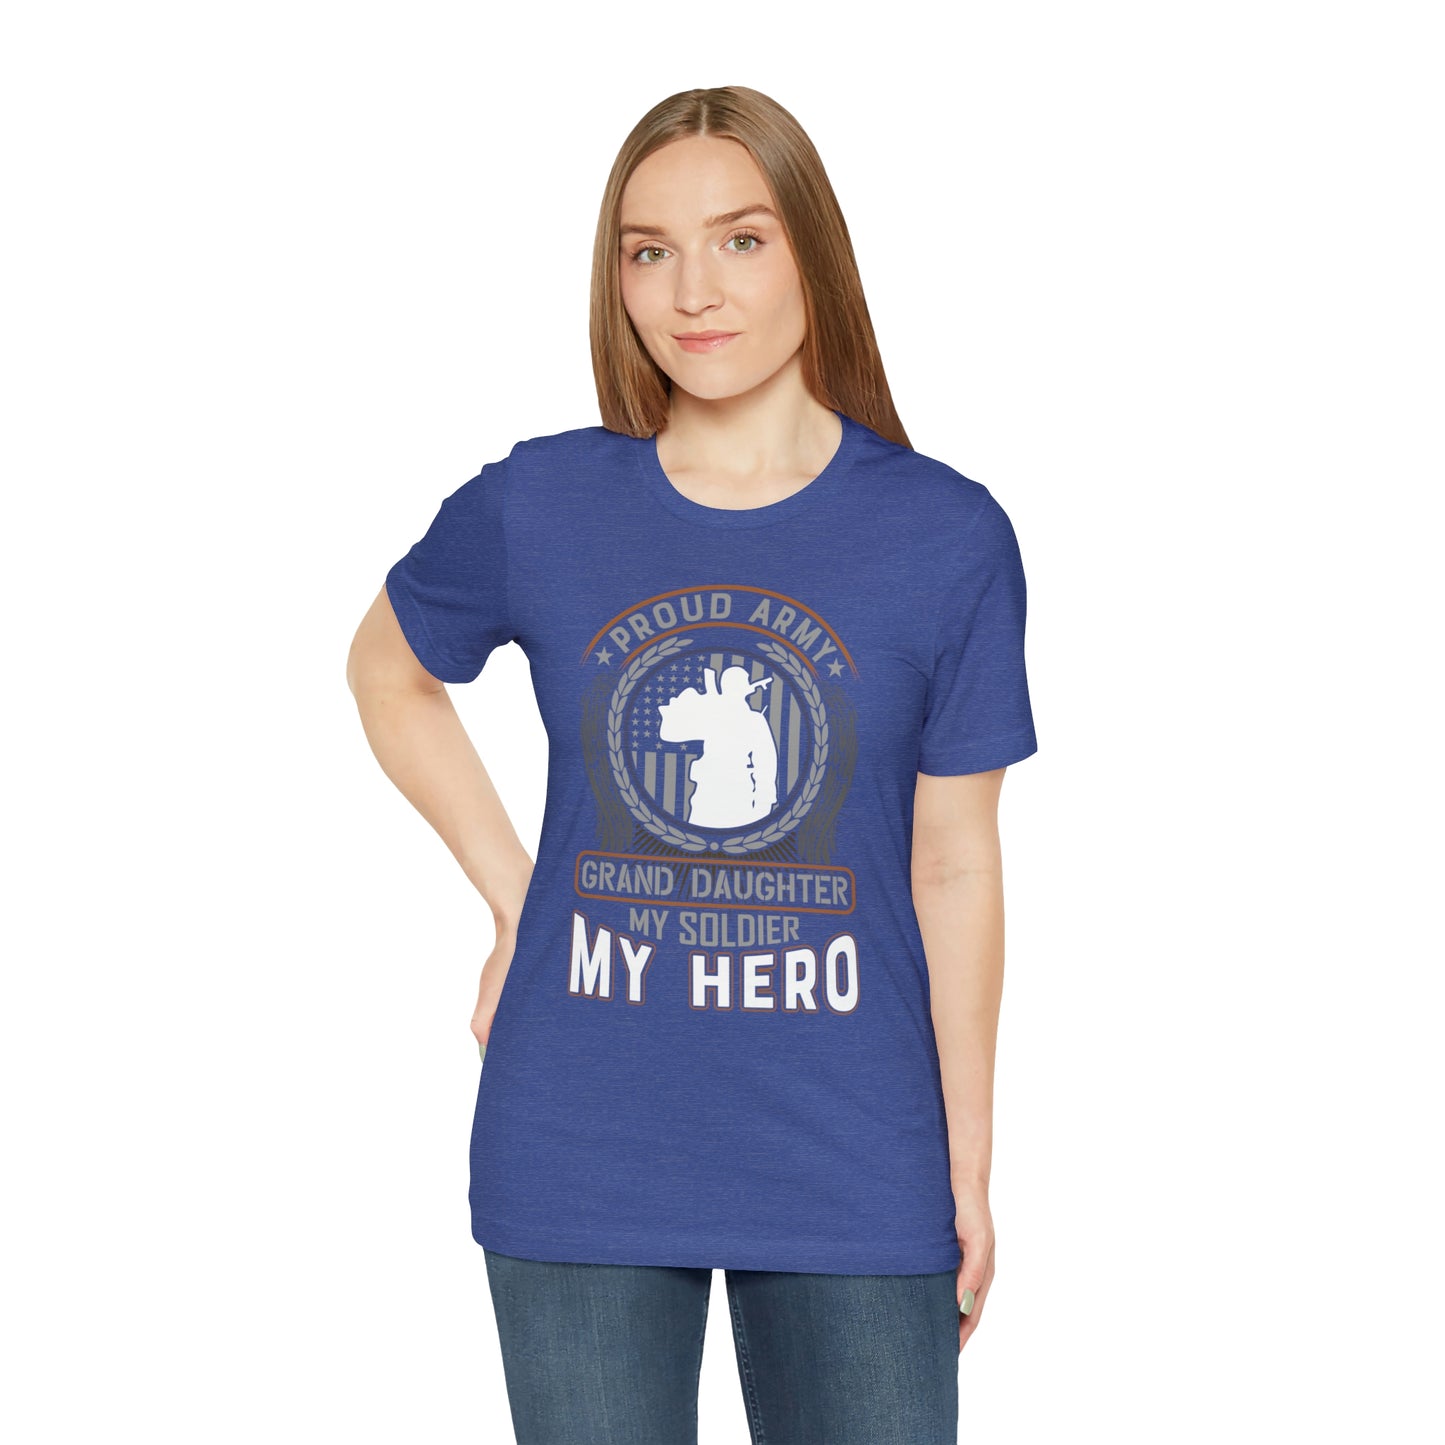 Proud Army Granddaughter My Soldier My Hero Short Sleeve T-shirt